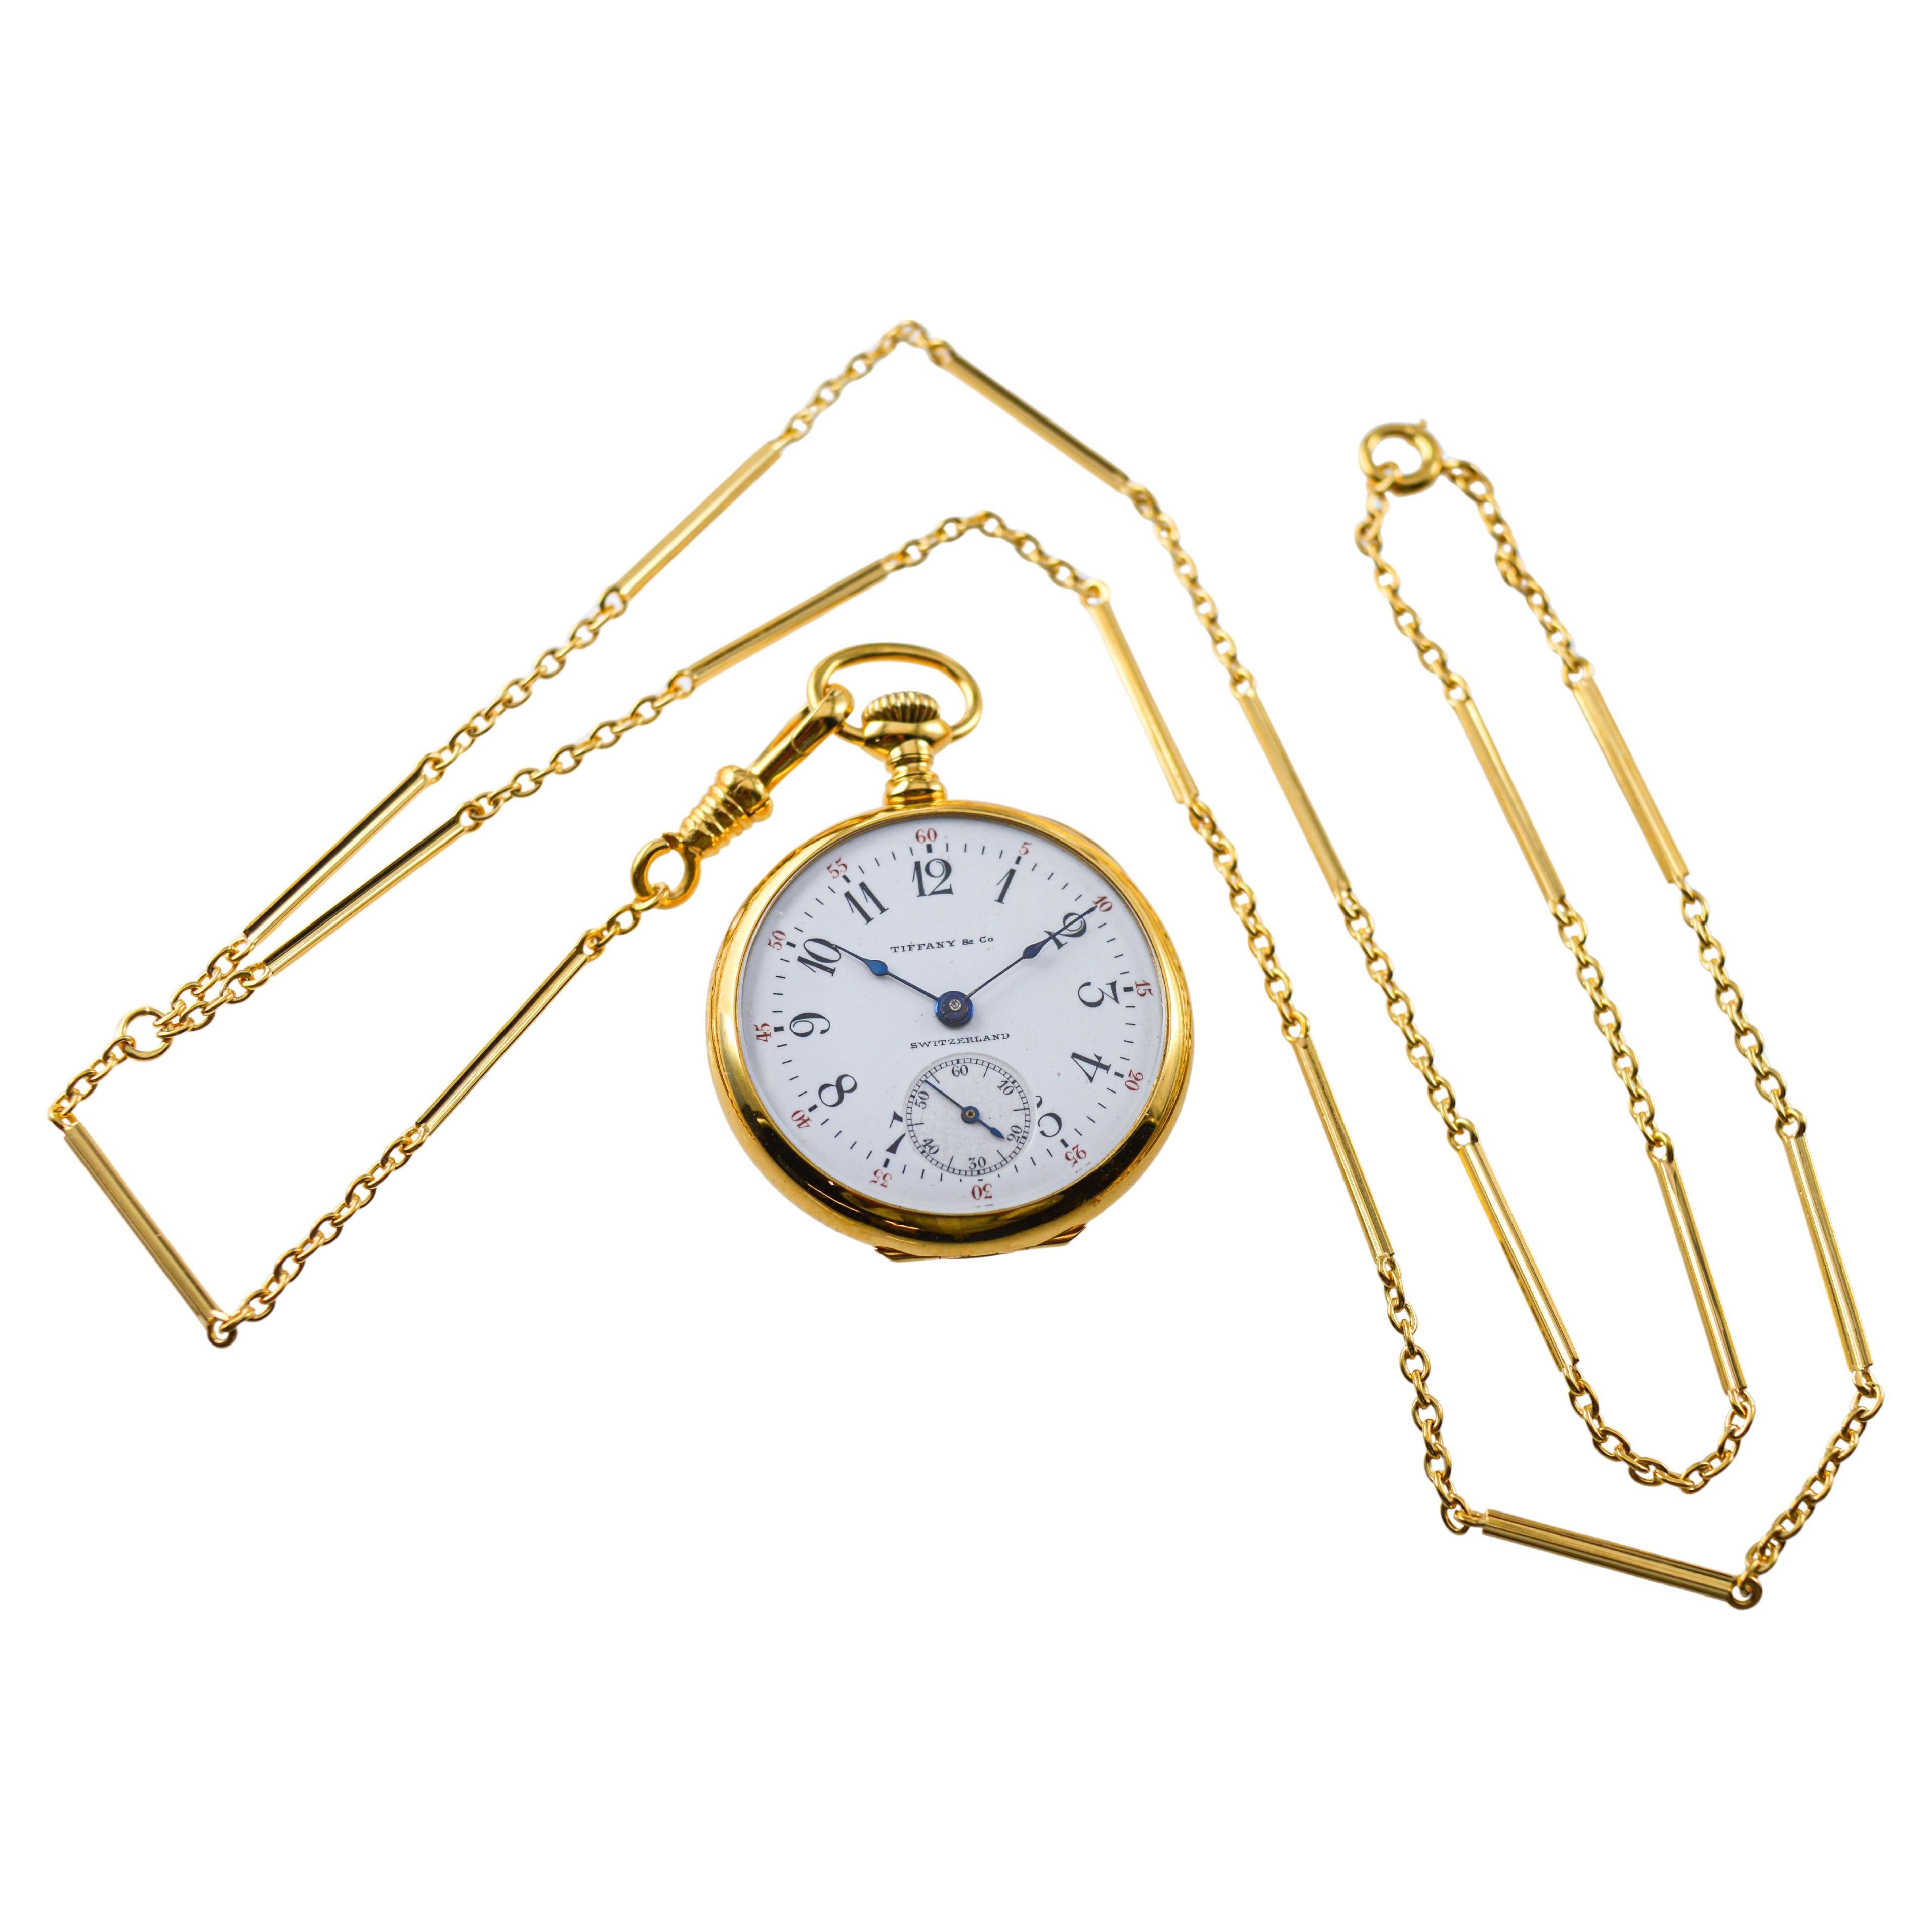 FACTORY / HOUSE: Longines for Tiffany & Co
STYLE / REFERENCE: Art Deco / Pendant Watch & Chain
METAL / MATERIAL: 18Kt. Yellow Gold
CIRCA / YEAR: 1912
DIMENSIONS / SIZE: Diameter 29mm
MOVEMENT / CALIBER: Manual Winding / 15 Jewels / Longines  
DIAL /